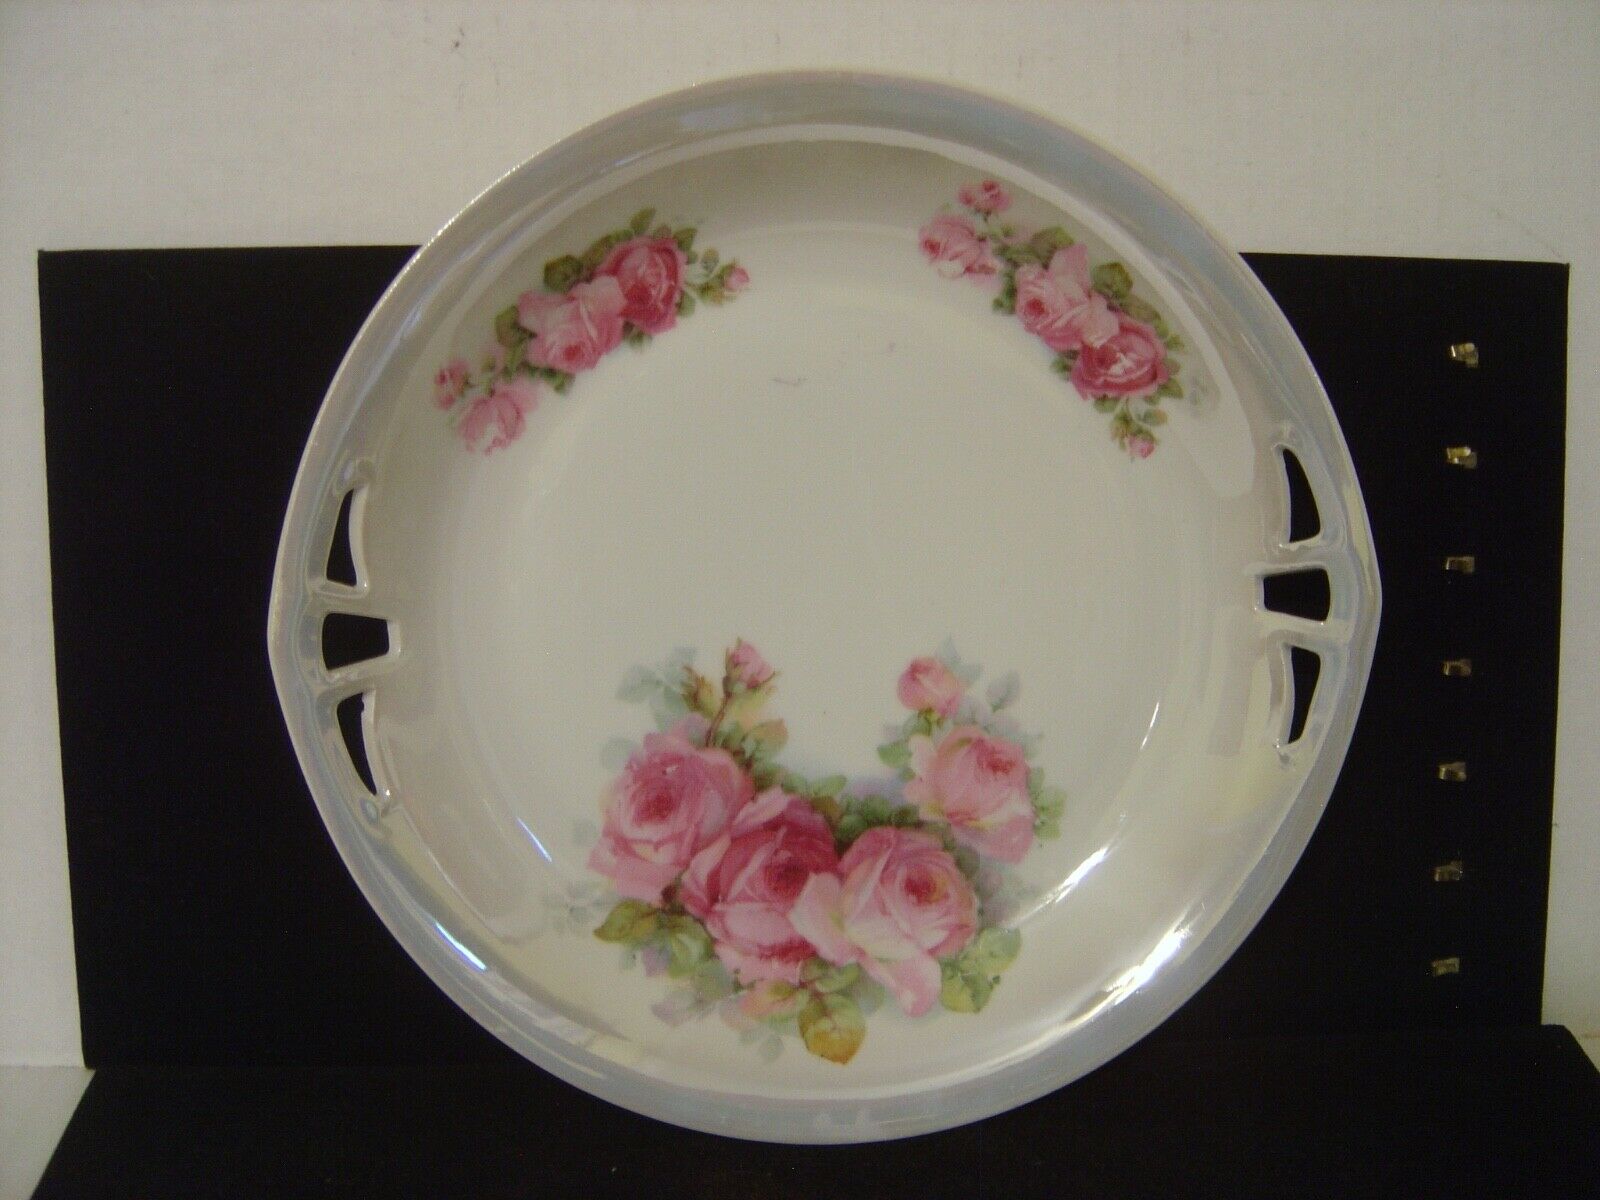 Vintage P K Selesia Luster Plate With Pink Roses And Cut Out Handles 9"